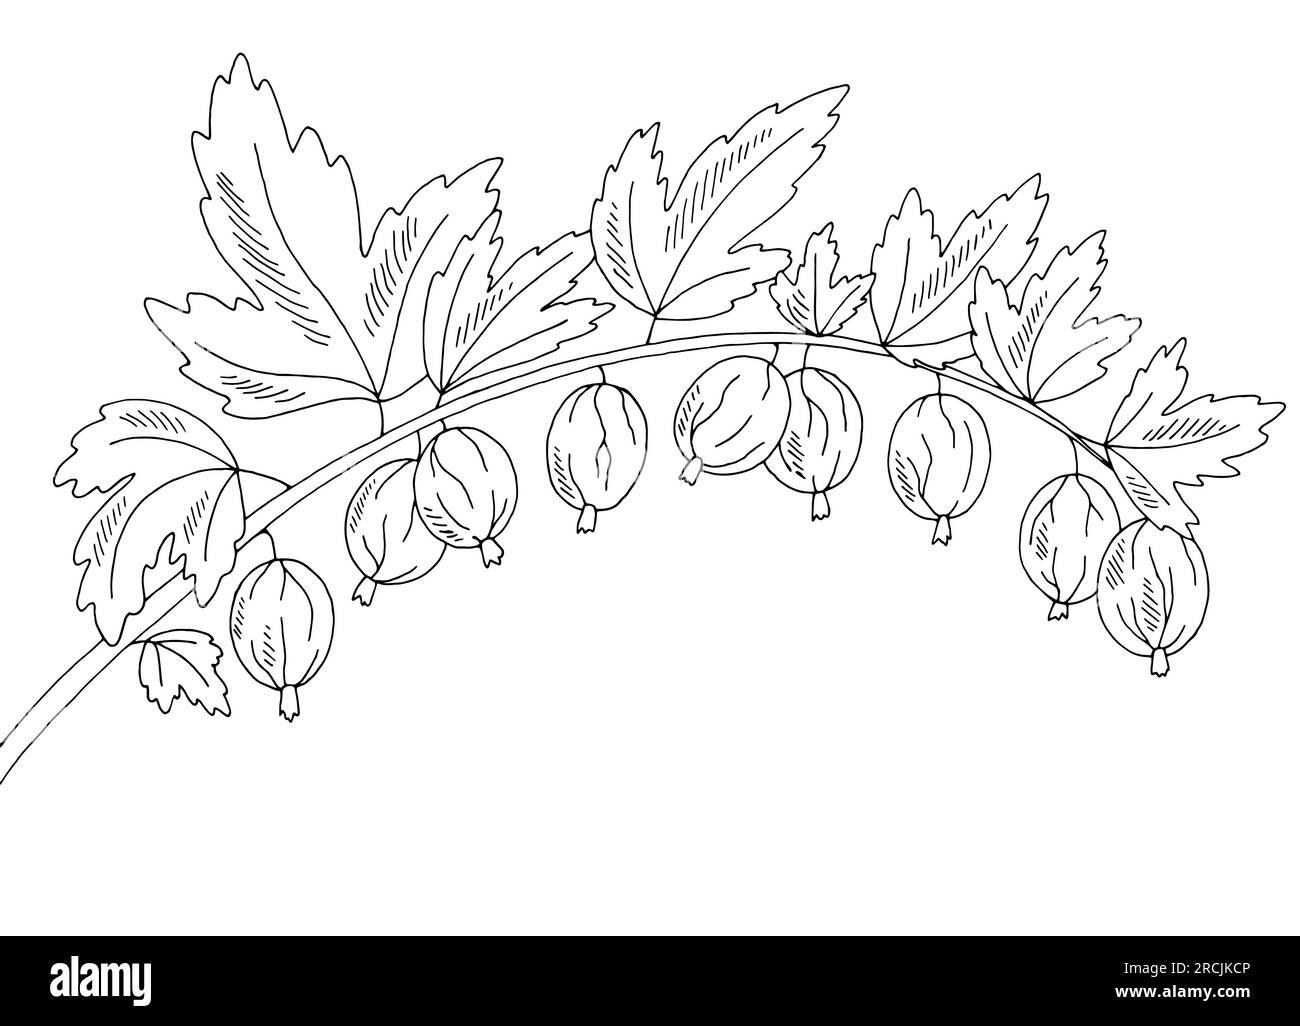 Gooseberry berry graphic branch black white isolated sketch illustration vector Stock Vector